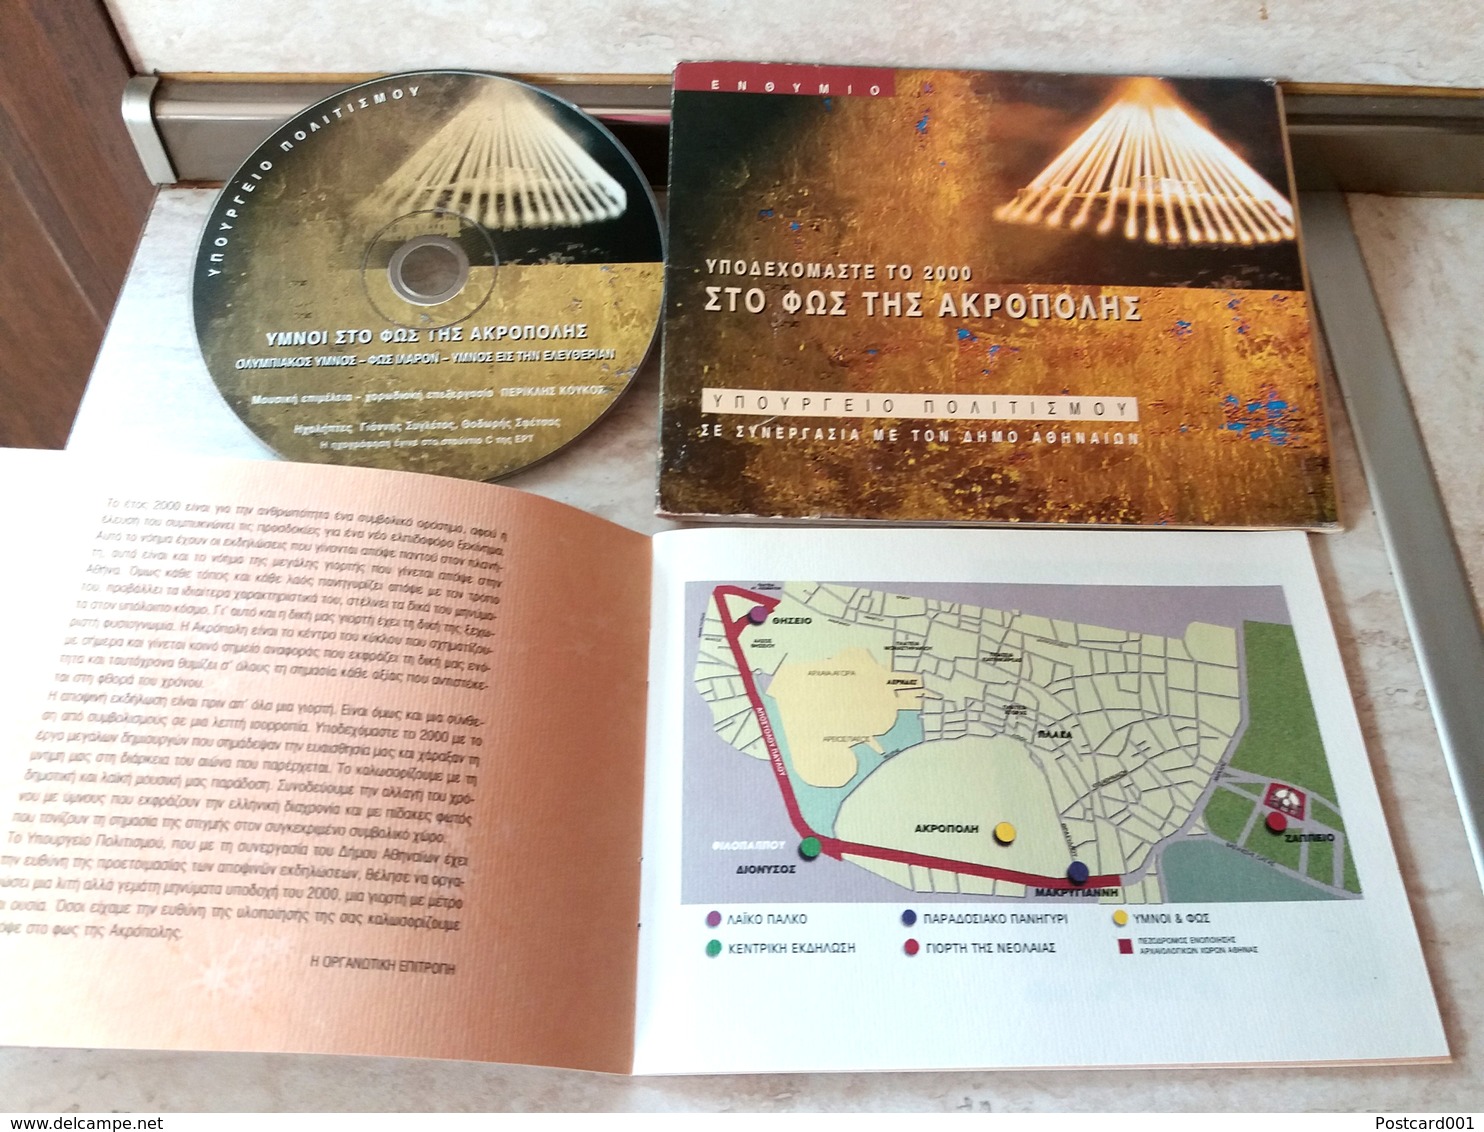 ACROPOLE IN LIGHT AND MUSIC - DVD AND BOOK WITH TEXTS OF GREEK SONGS (1) - Music On DVD